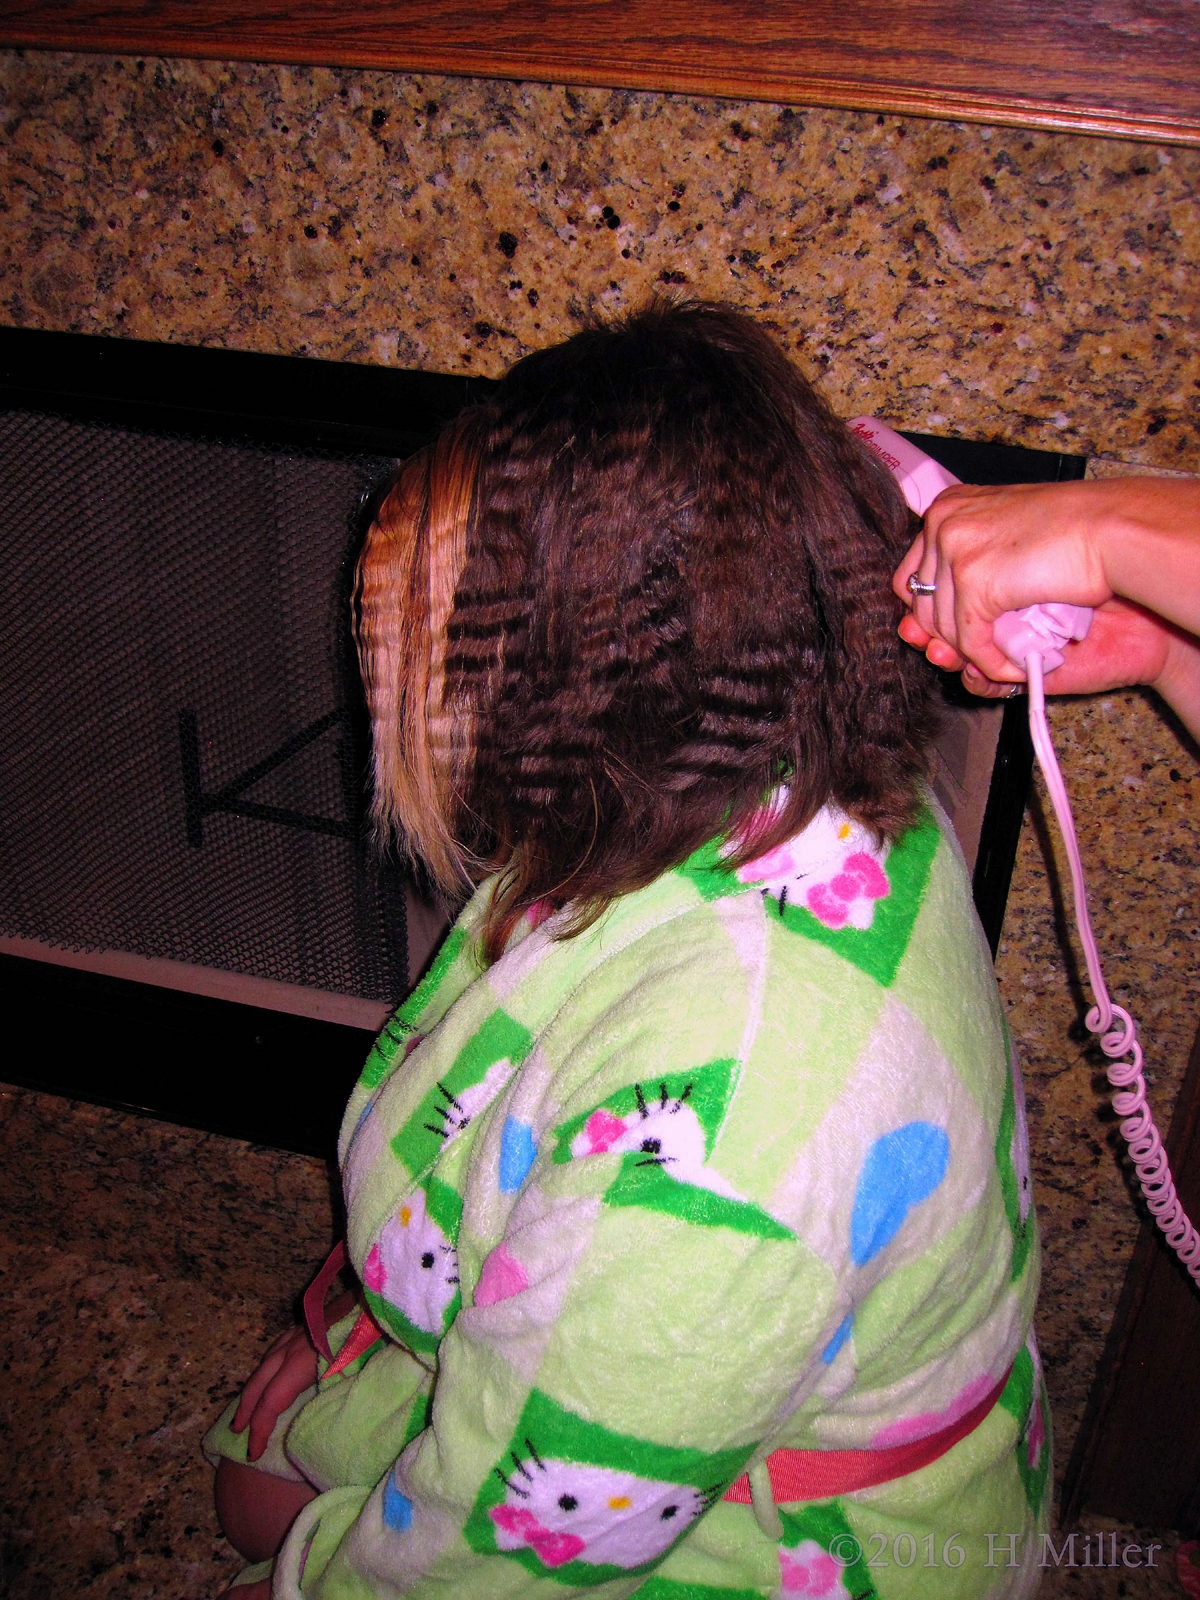 Getting Her Hair Crimped.